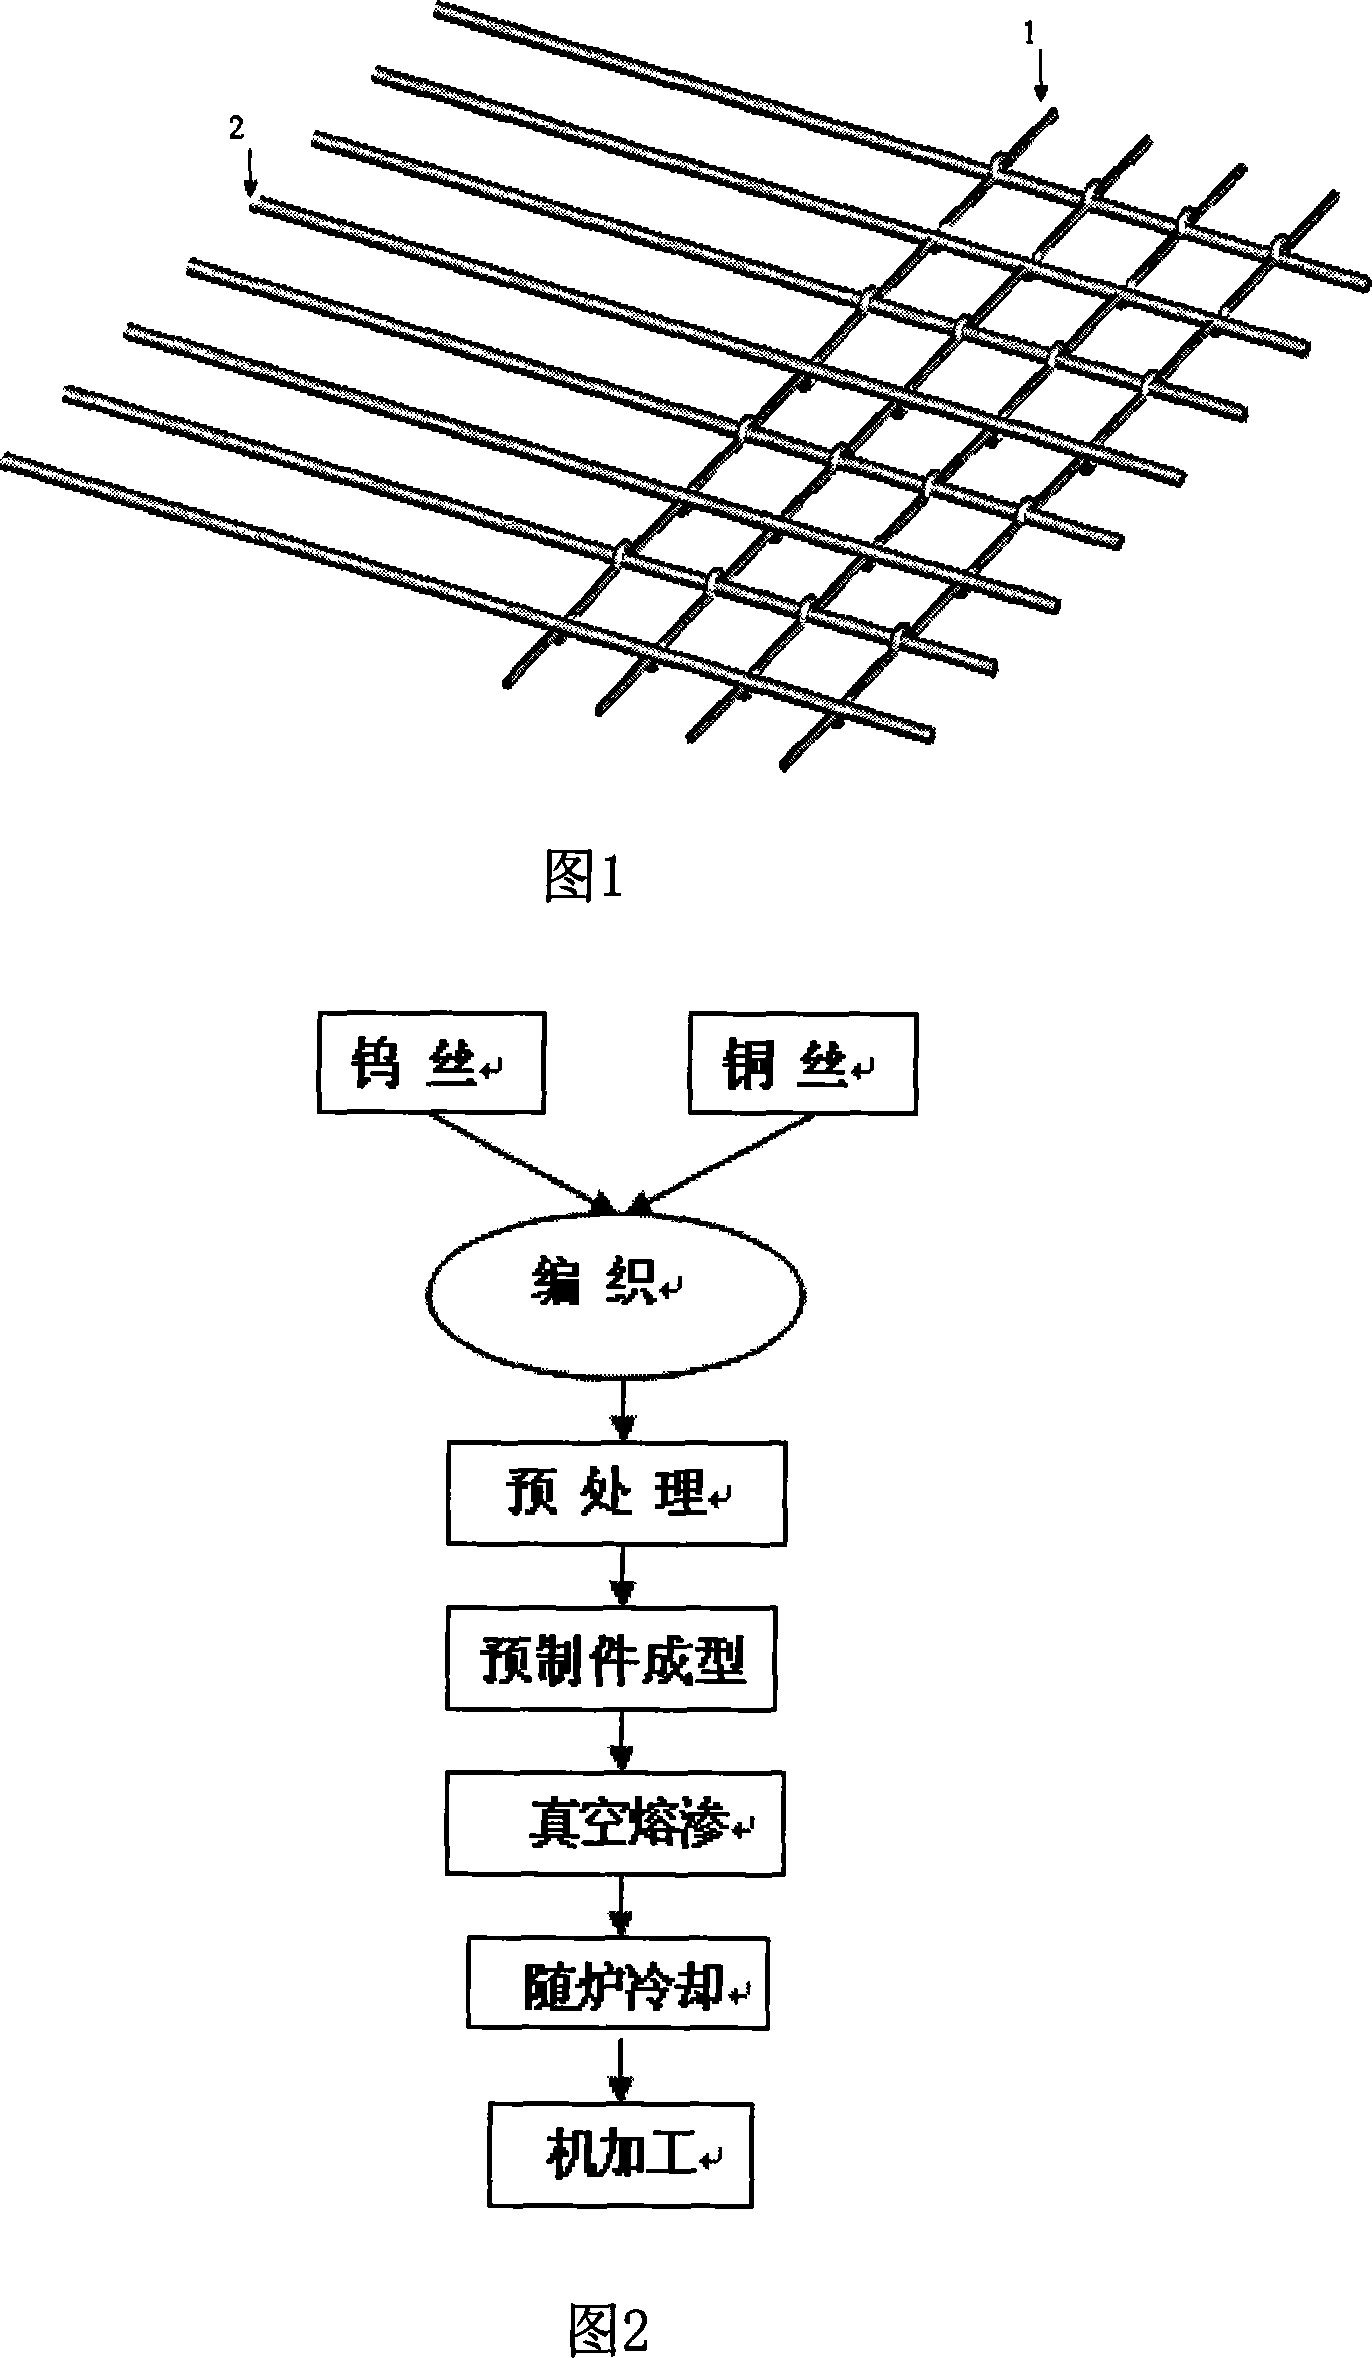 Method for preparing wolfram steel or composite material of tungsten and silver